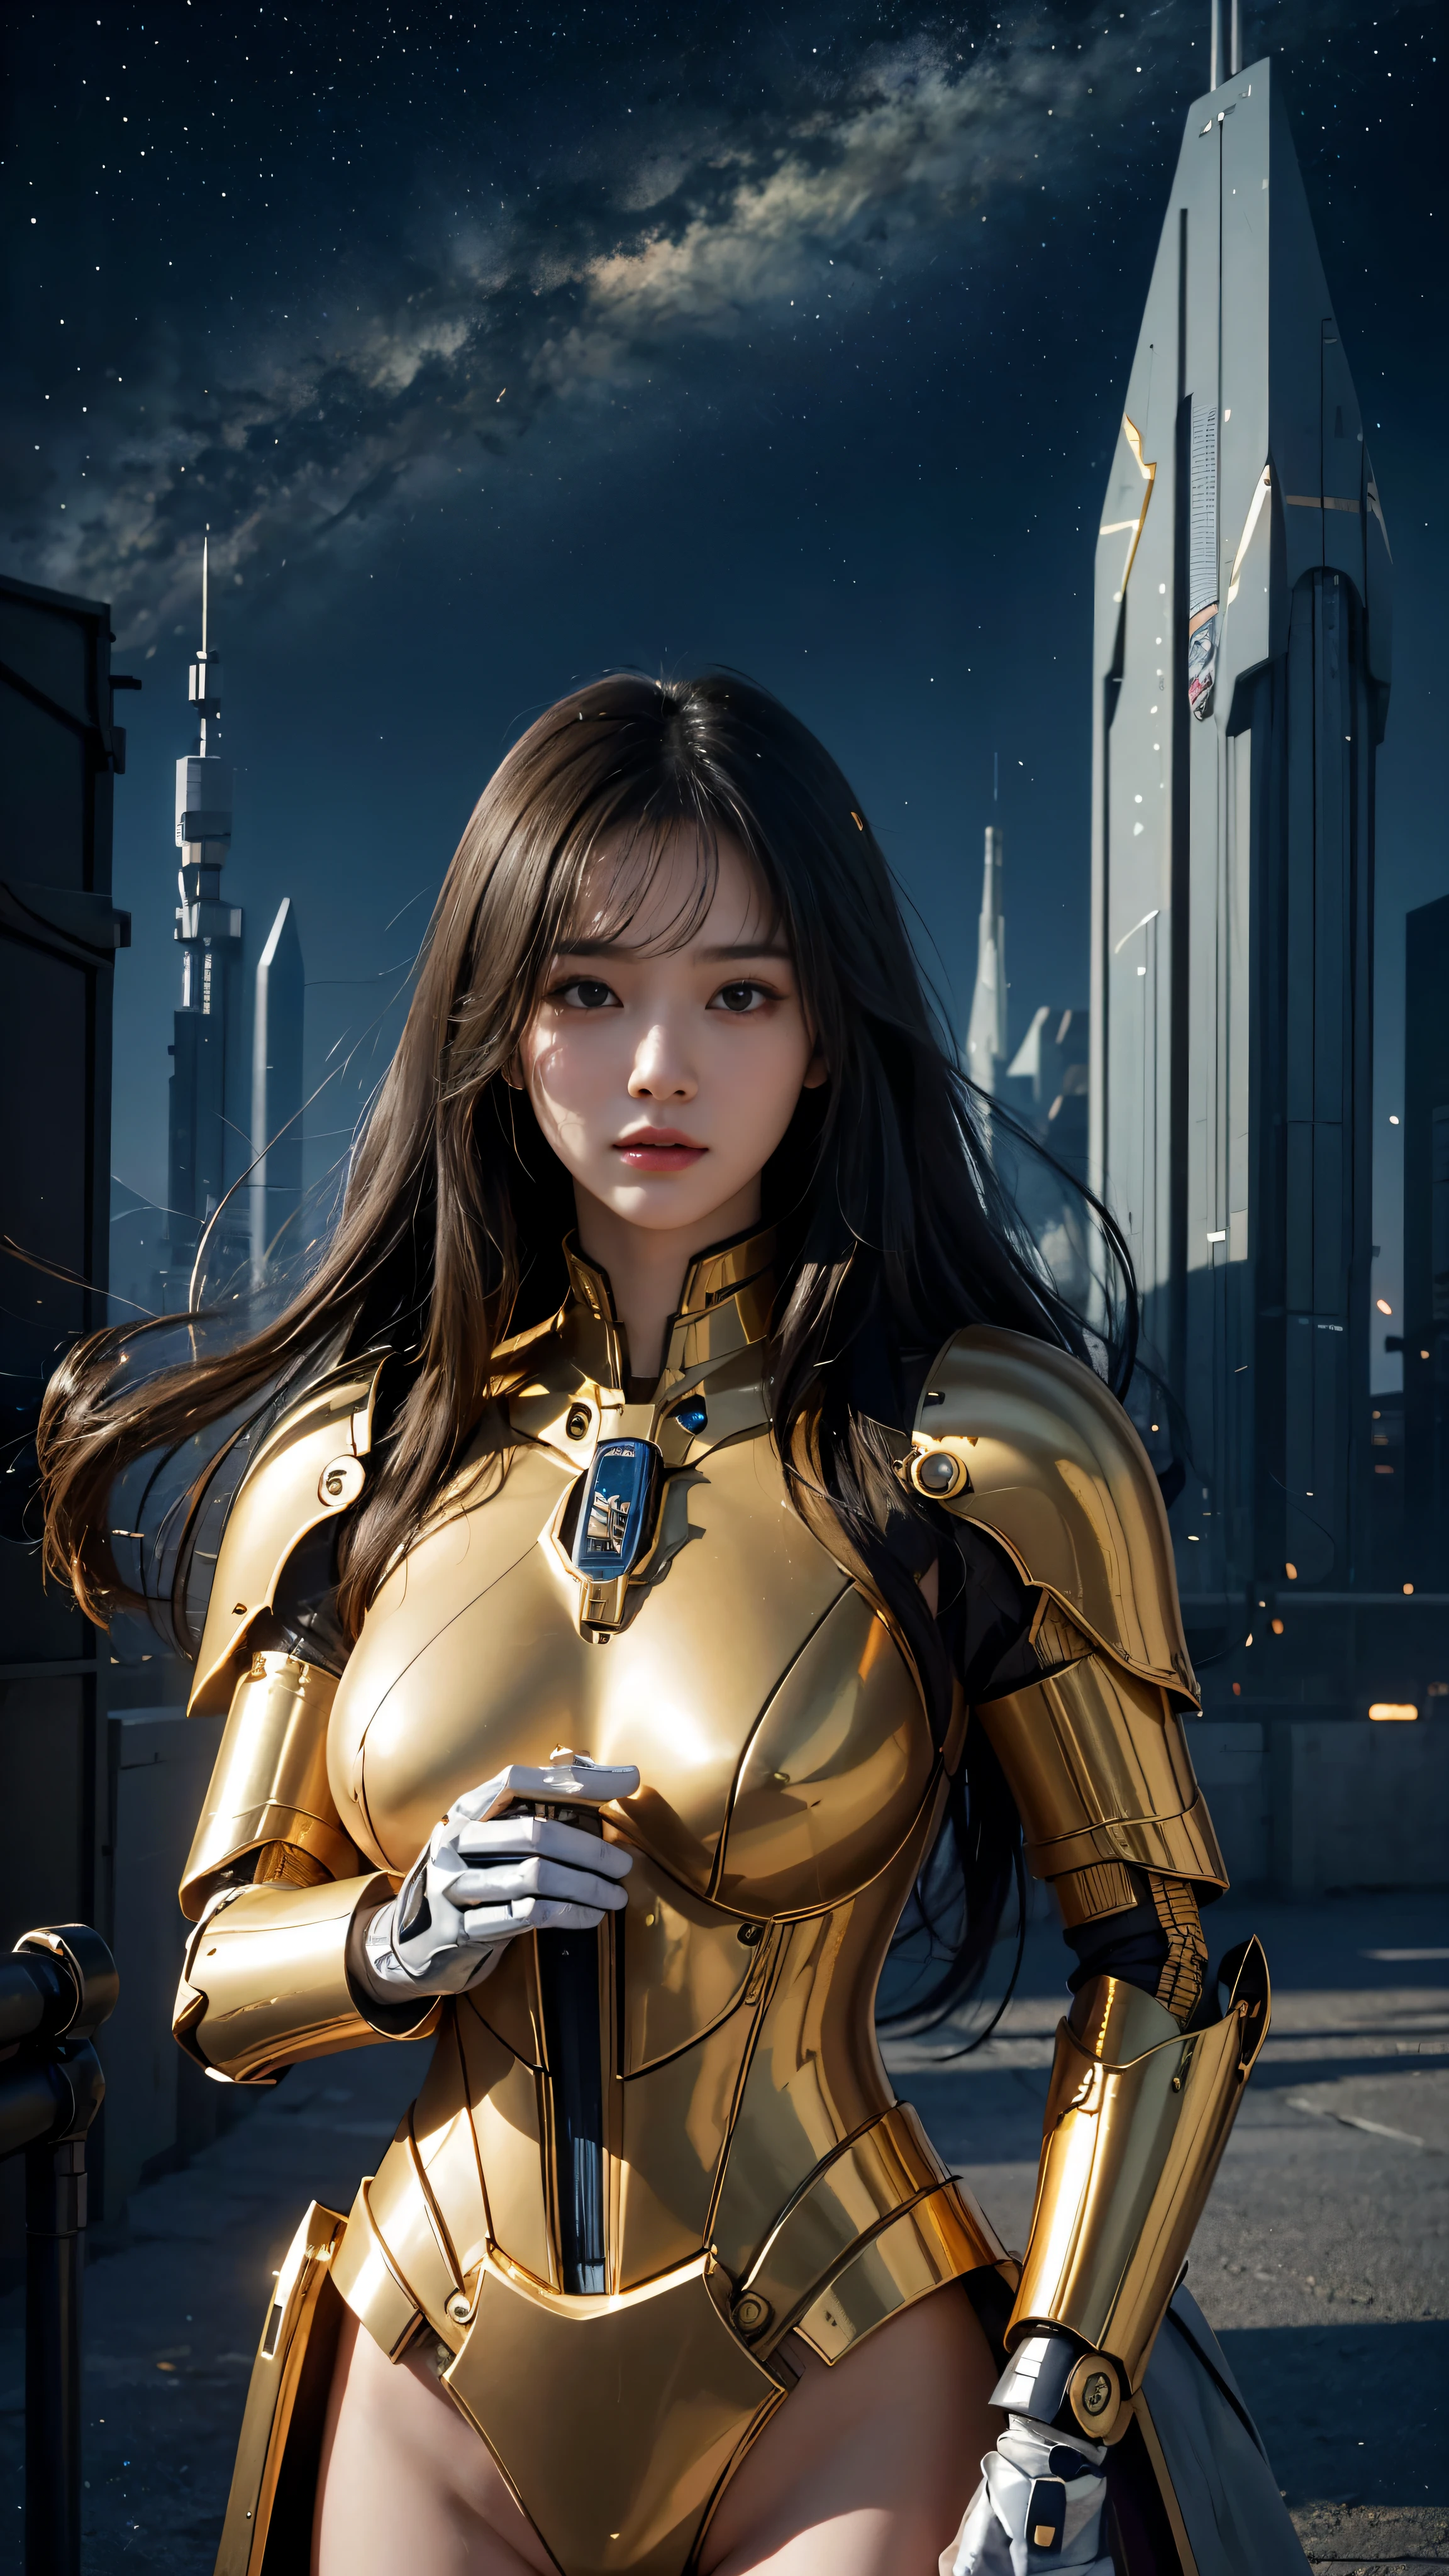 highest quality、masterpiece、An illustration、very delicate and beautiful、very detailedな、CG、unity、8k wallpaper、amazing、fine detailasterpiece、highest quality、official art、very detailed CG unity 8k wallpaper、disorganized、incredibly disorganized、Super detailed、High resolution、very detailed、beautiful detailed girl、light on the face、1girl、Mecha、Gold Armor、mechanical_body、black hair、spaceship、City、cyber punk、star_sky、Star Wars universe